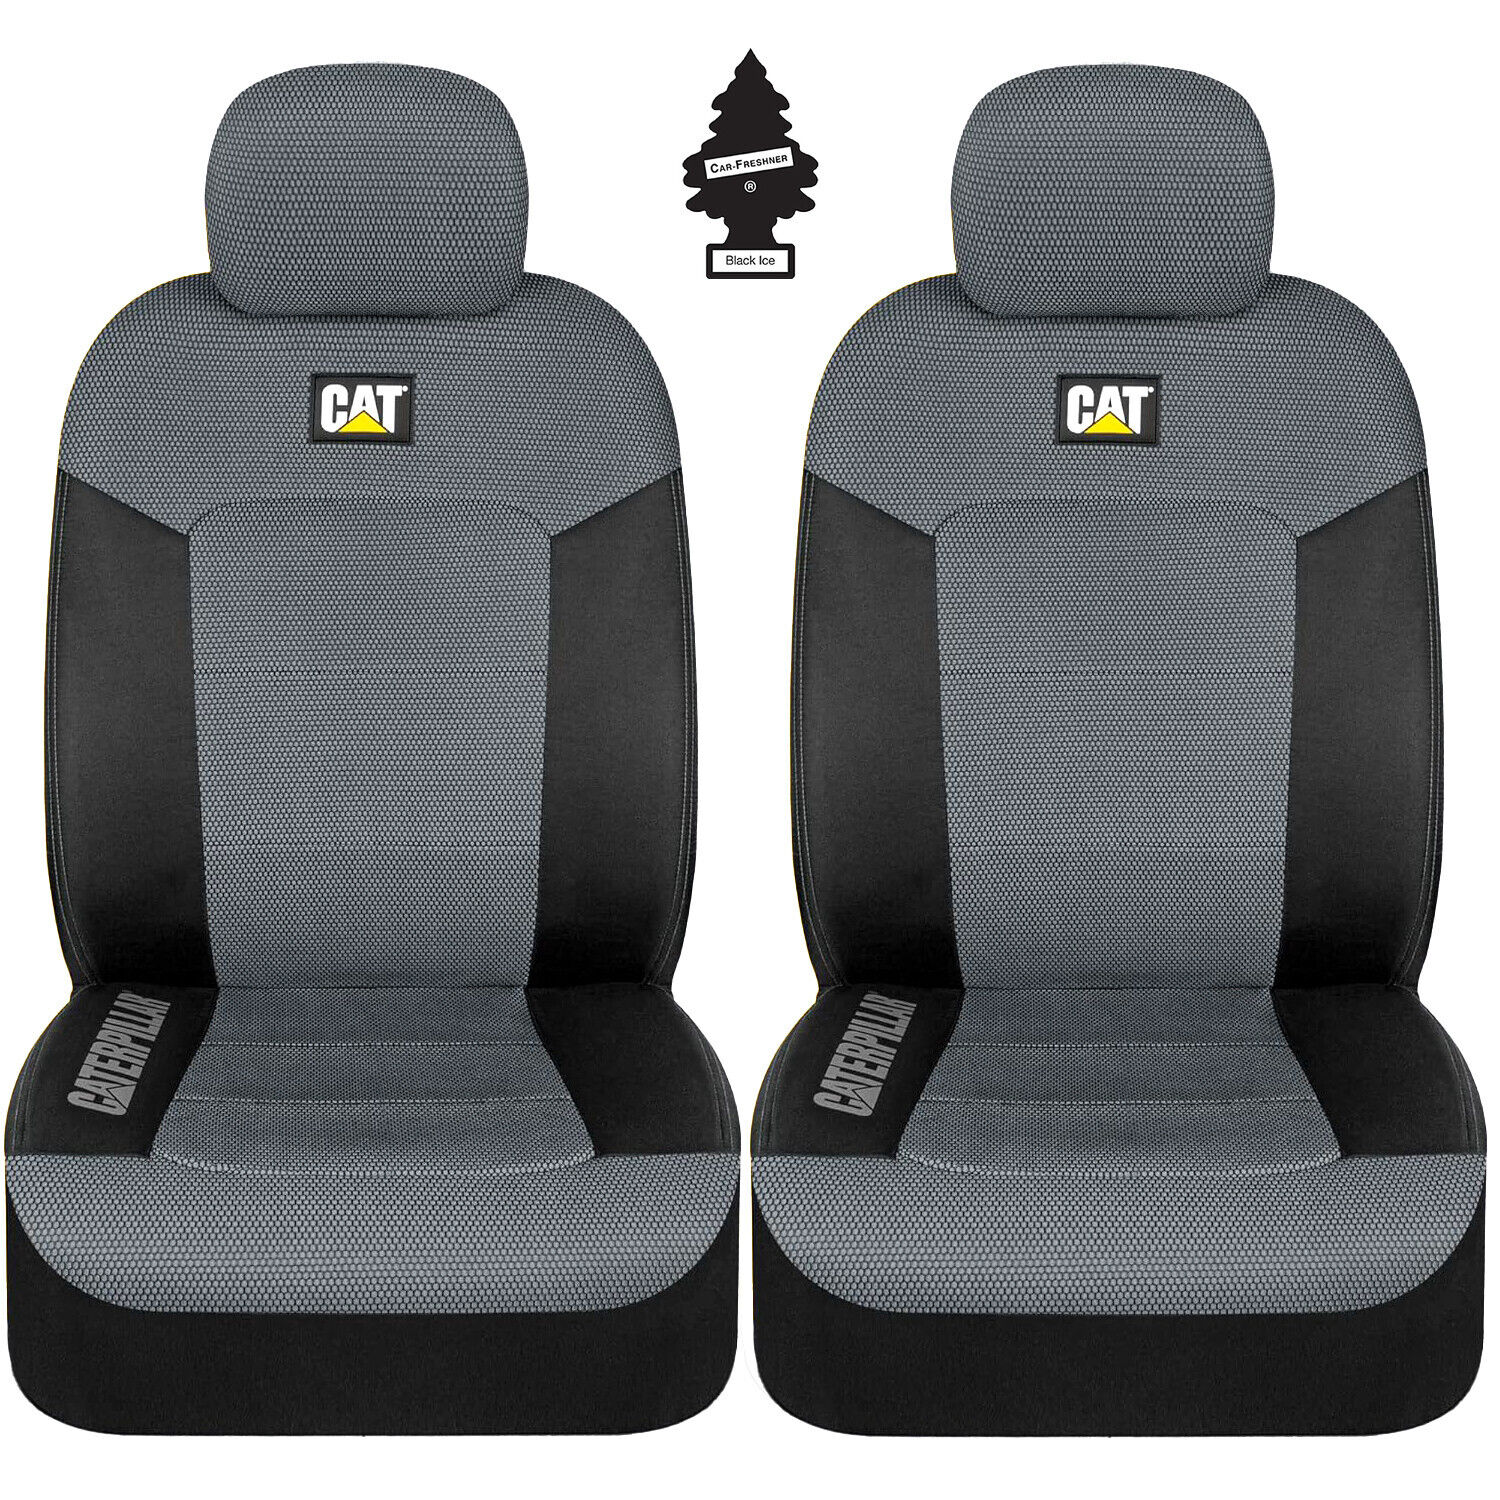 ⭐️⭐️⭐️⭐️⭐️New Caterpillar Car Truck Front Seat Covers Set Black Grey For Nissan